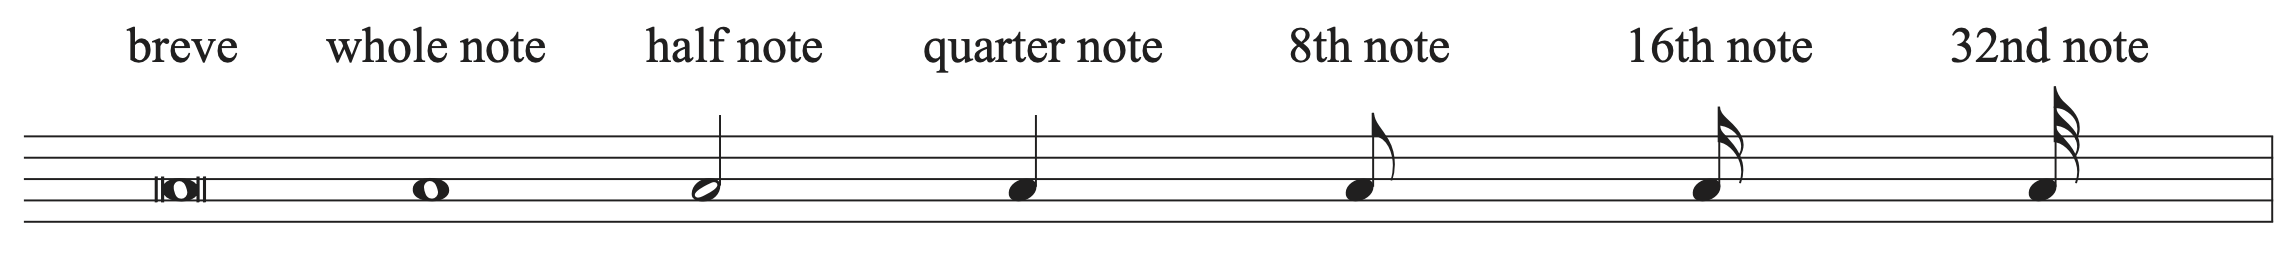 Breve, whole note, half note, quarter note, eighth note, sixteenth note, and thirty-second note drawn on a staff.